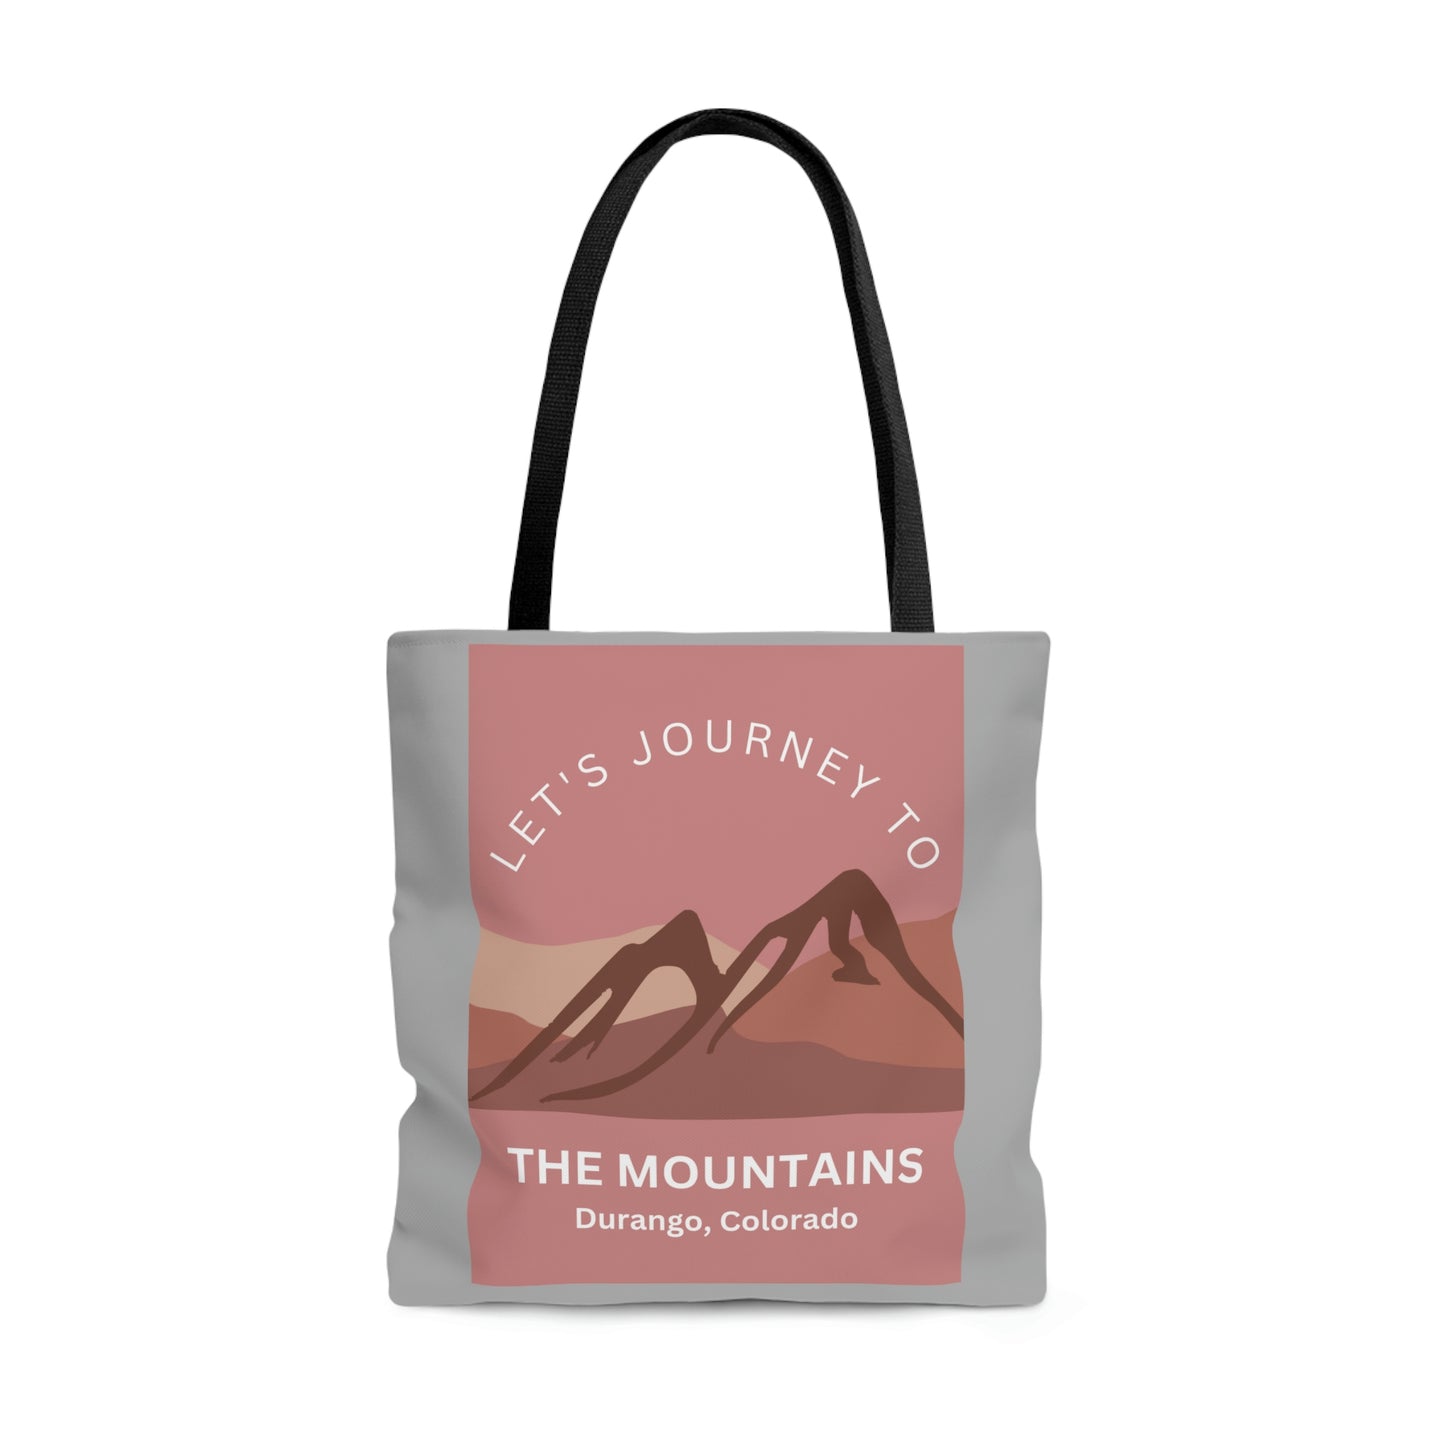 Lets Journey to the Mountains: Durango, Colorado Pink and Grey Tote Bag